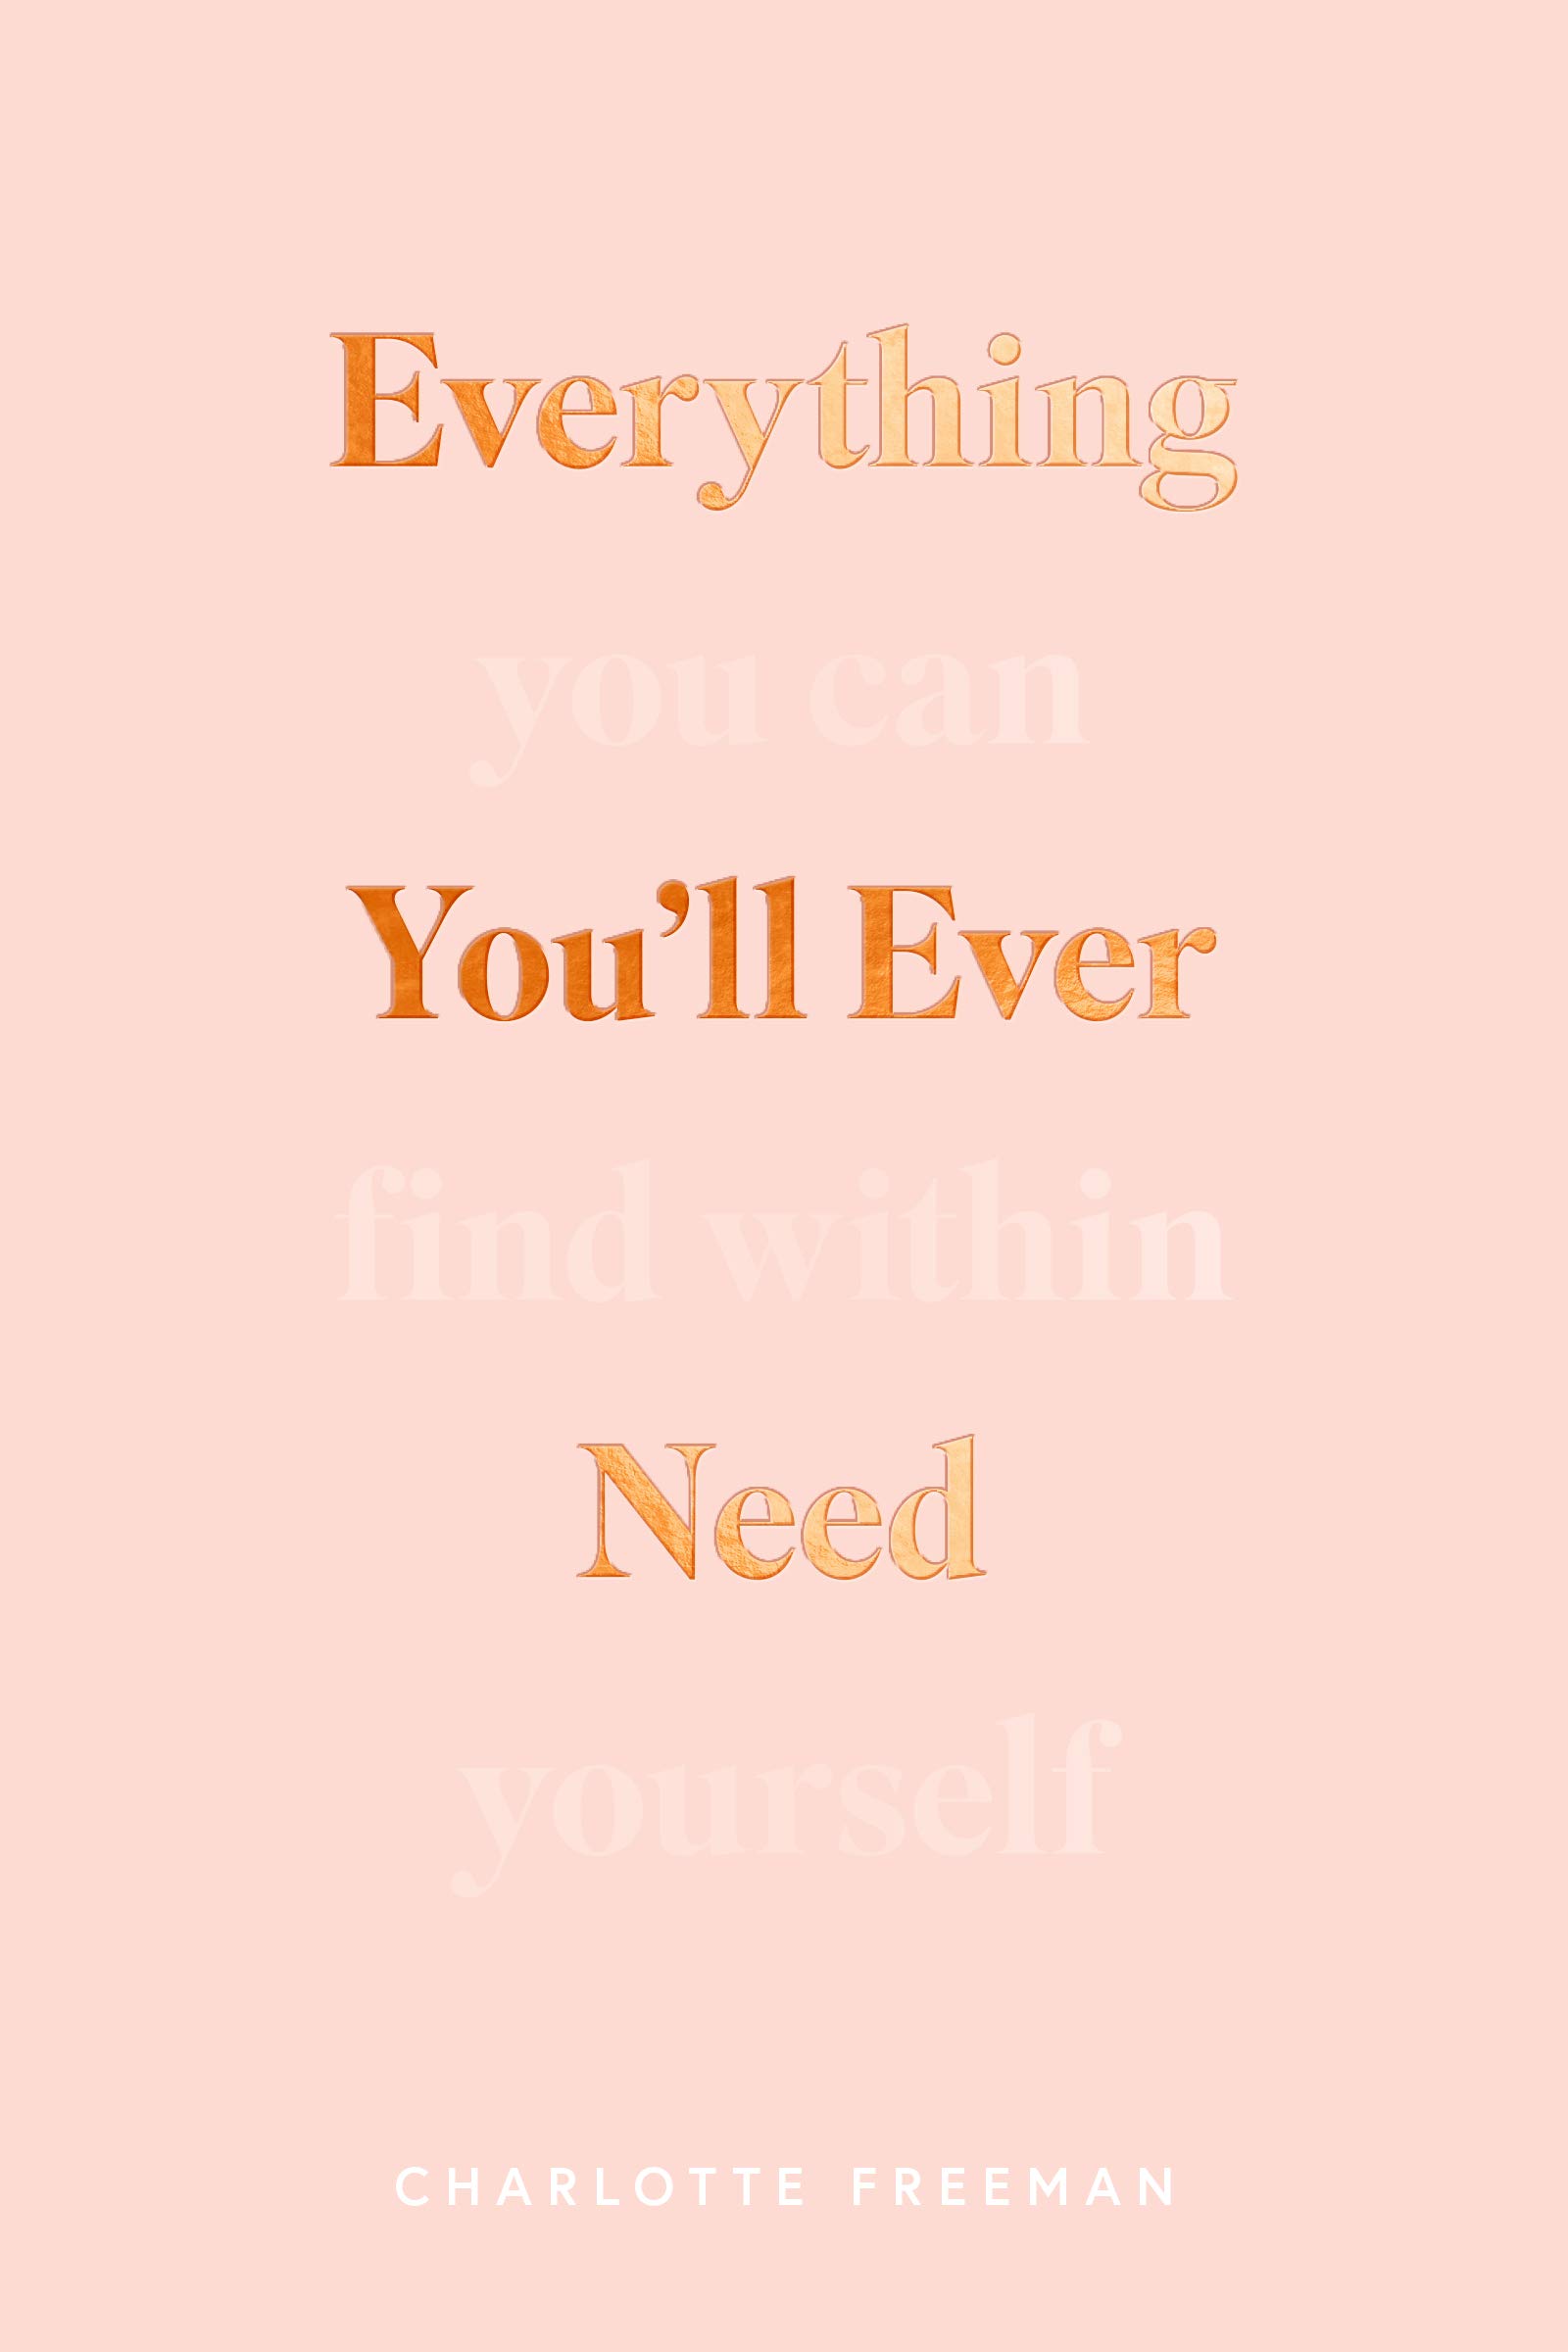 Everything you'll ever need :  you can find within yourself